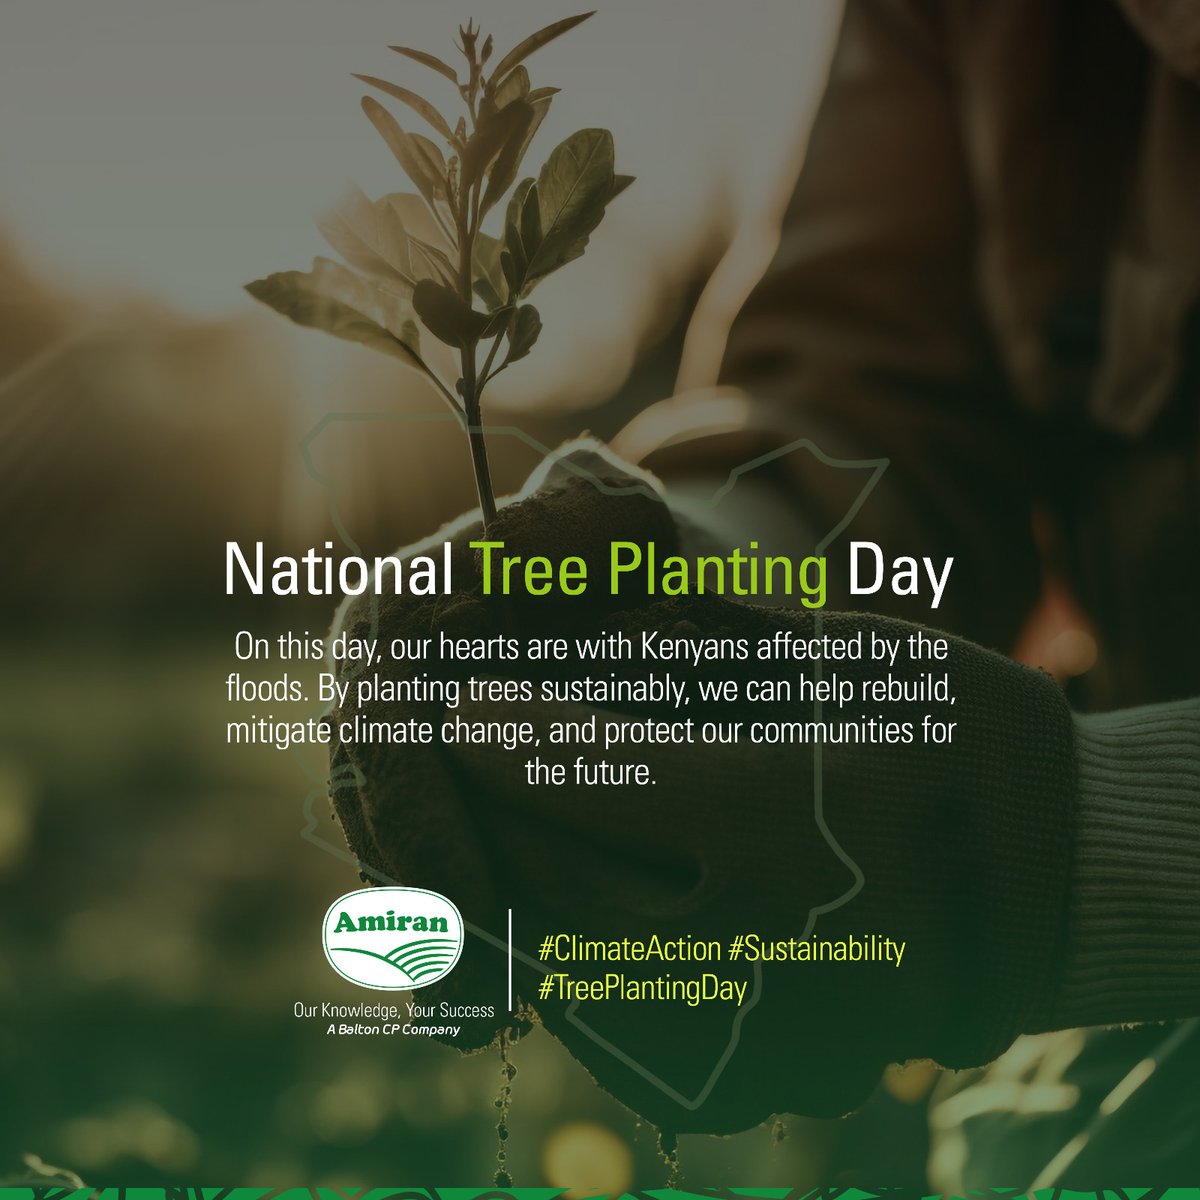 Happy National Tree Planting Day. We will be open on Saturday the 11th May. #ClimateAction #Sustainability #TreePlantingDay